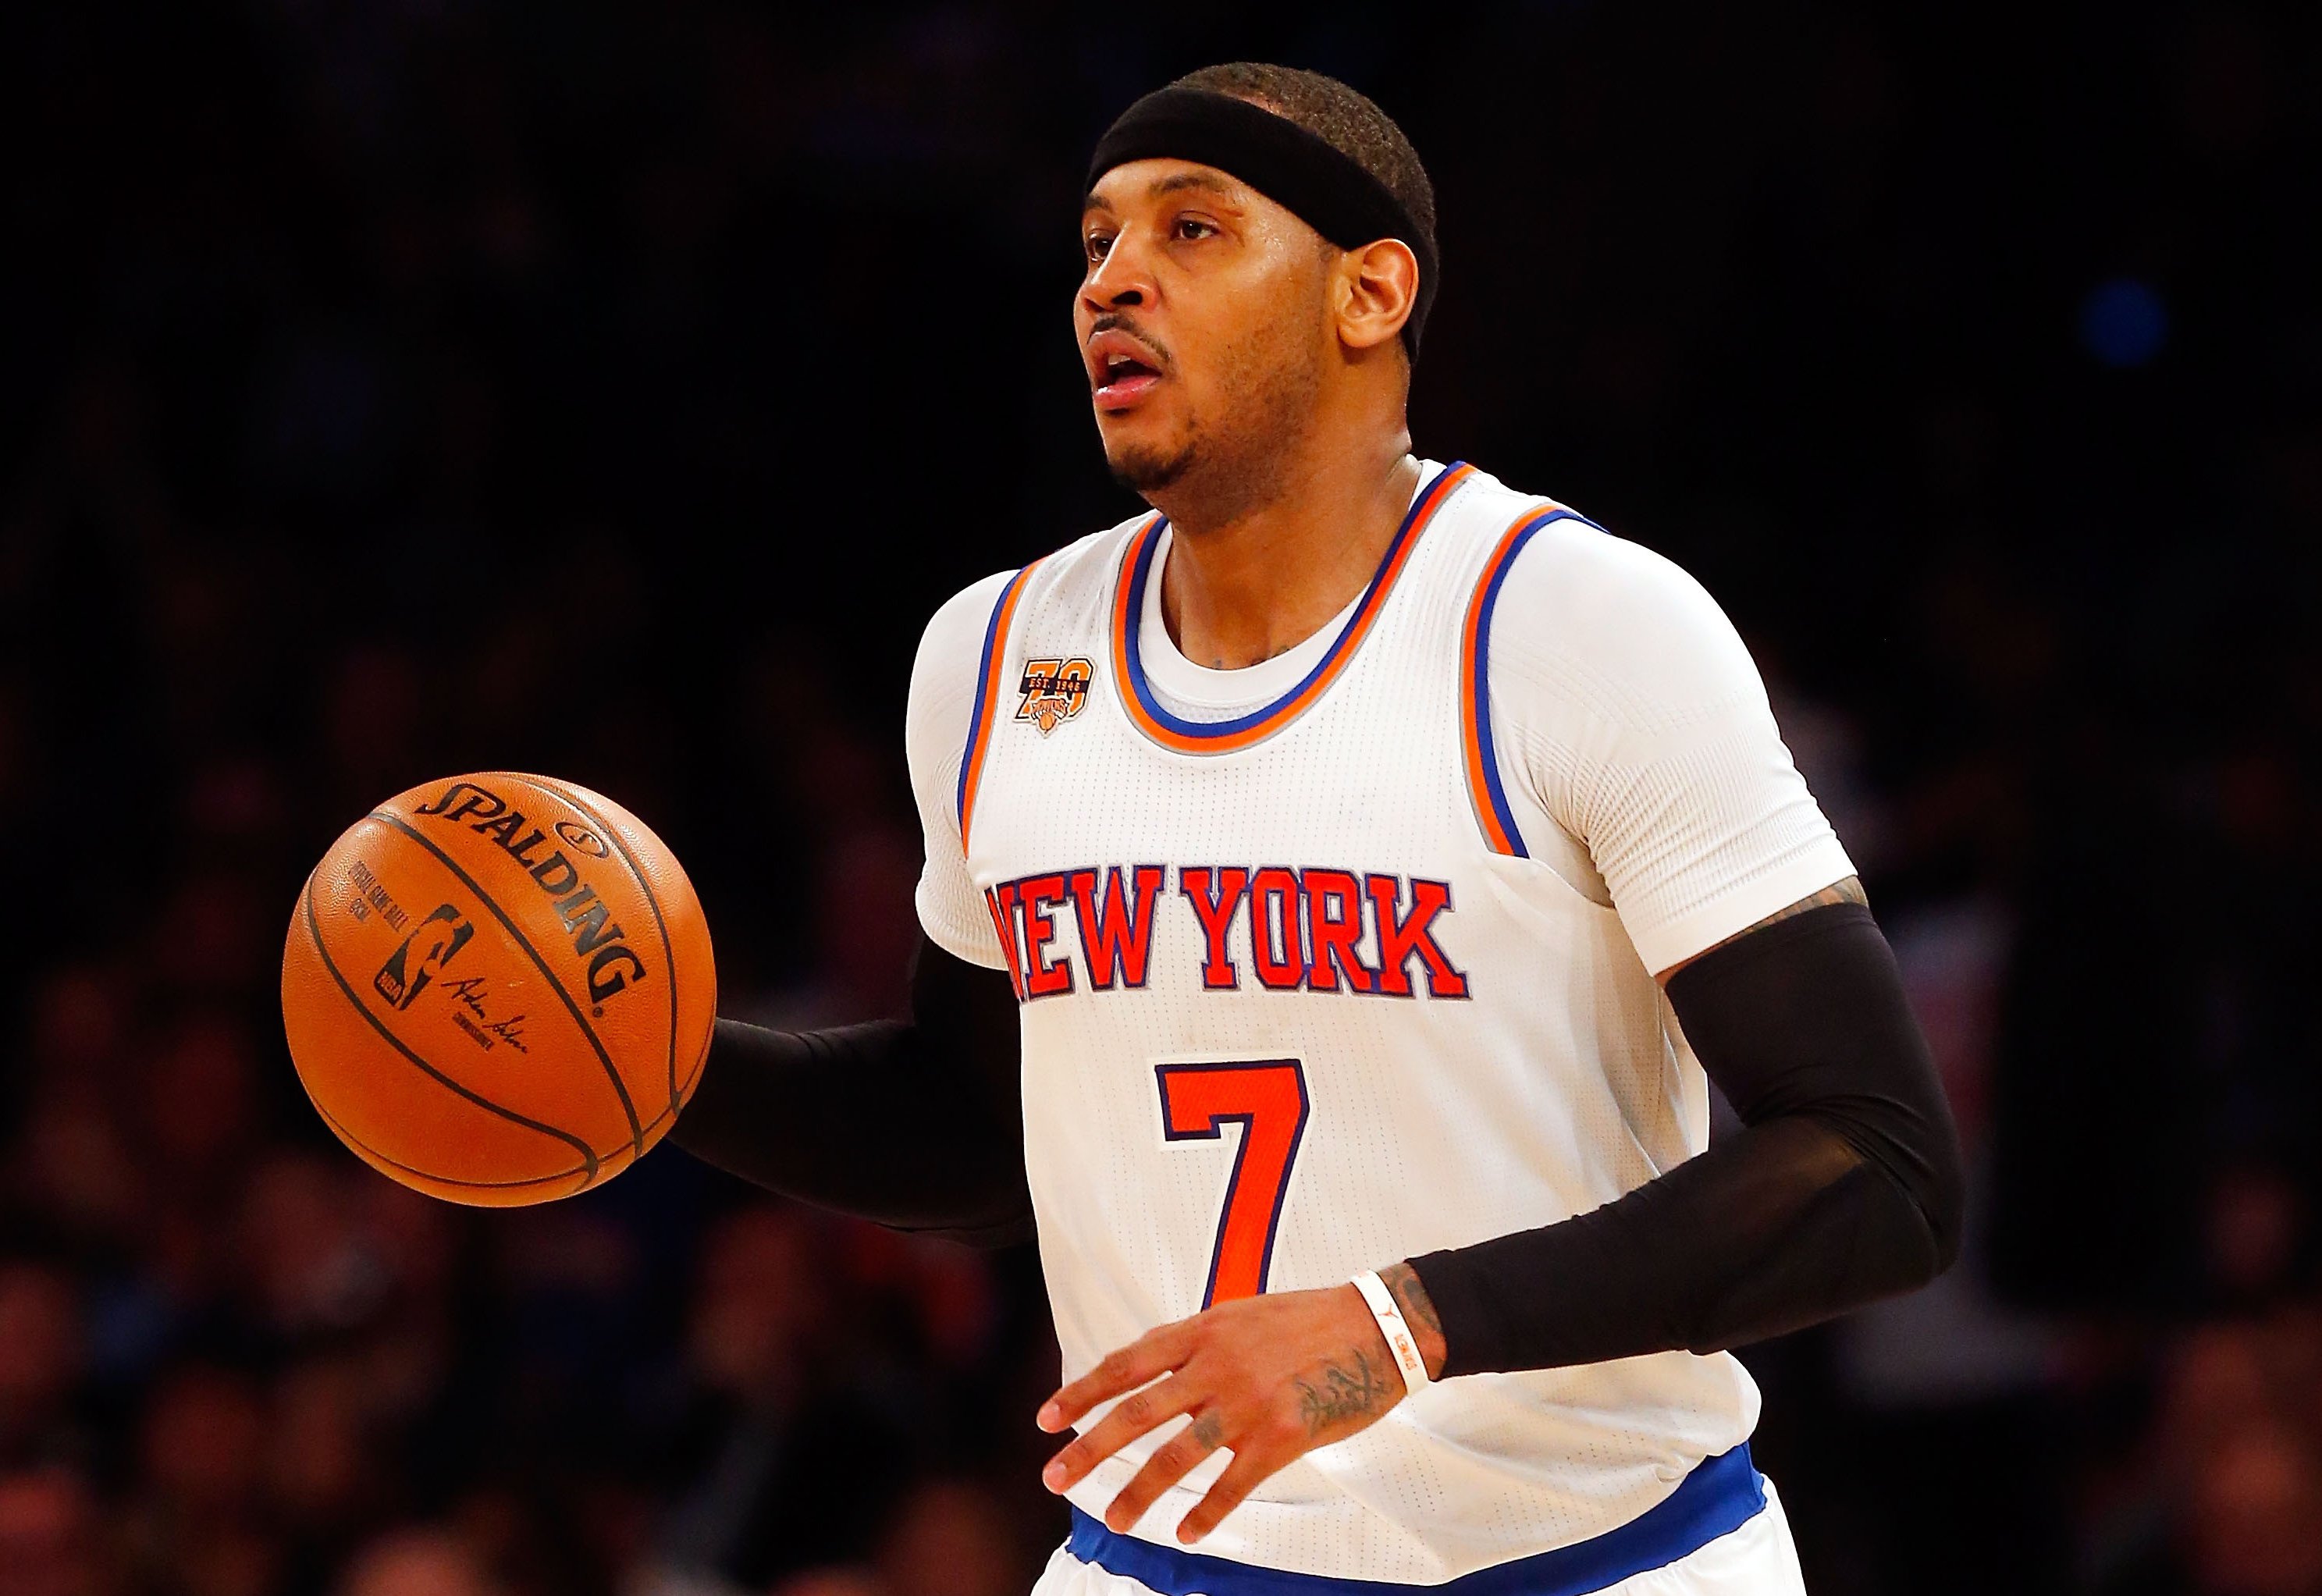 Oklahoma City Thunder forward Carmelo Anthony brings the ball up court  during the second quarter of an NBA basketball game against the New York  Knicks Saturday, Dec.16, 2017, at Madison Square Garden